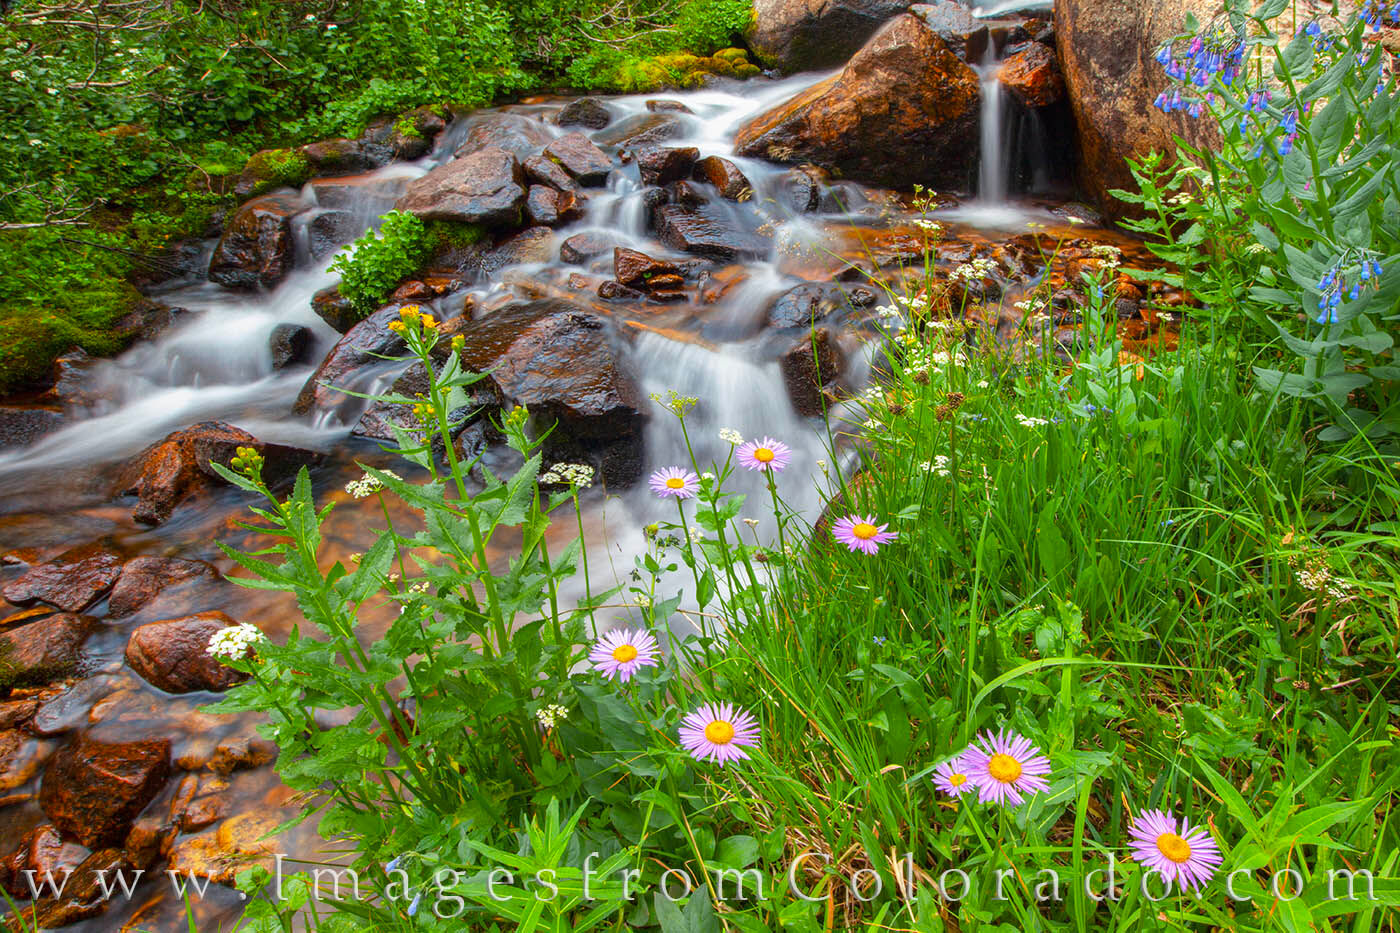 Another Colorado Image from atop Berthoud Pass - this one of daisies growing around a small stream. Hike a little ways off of...